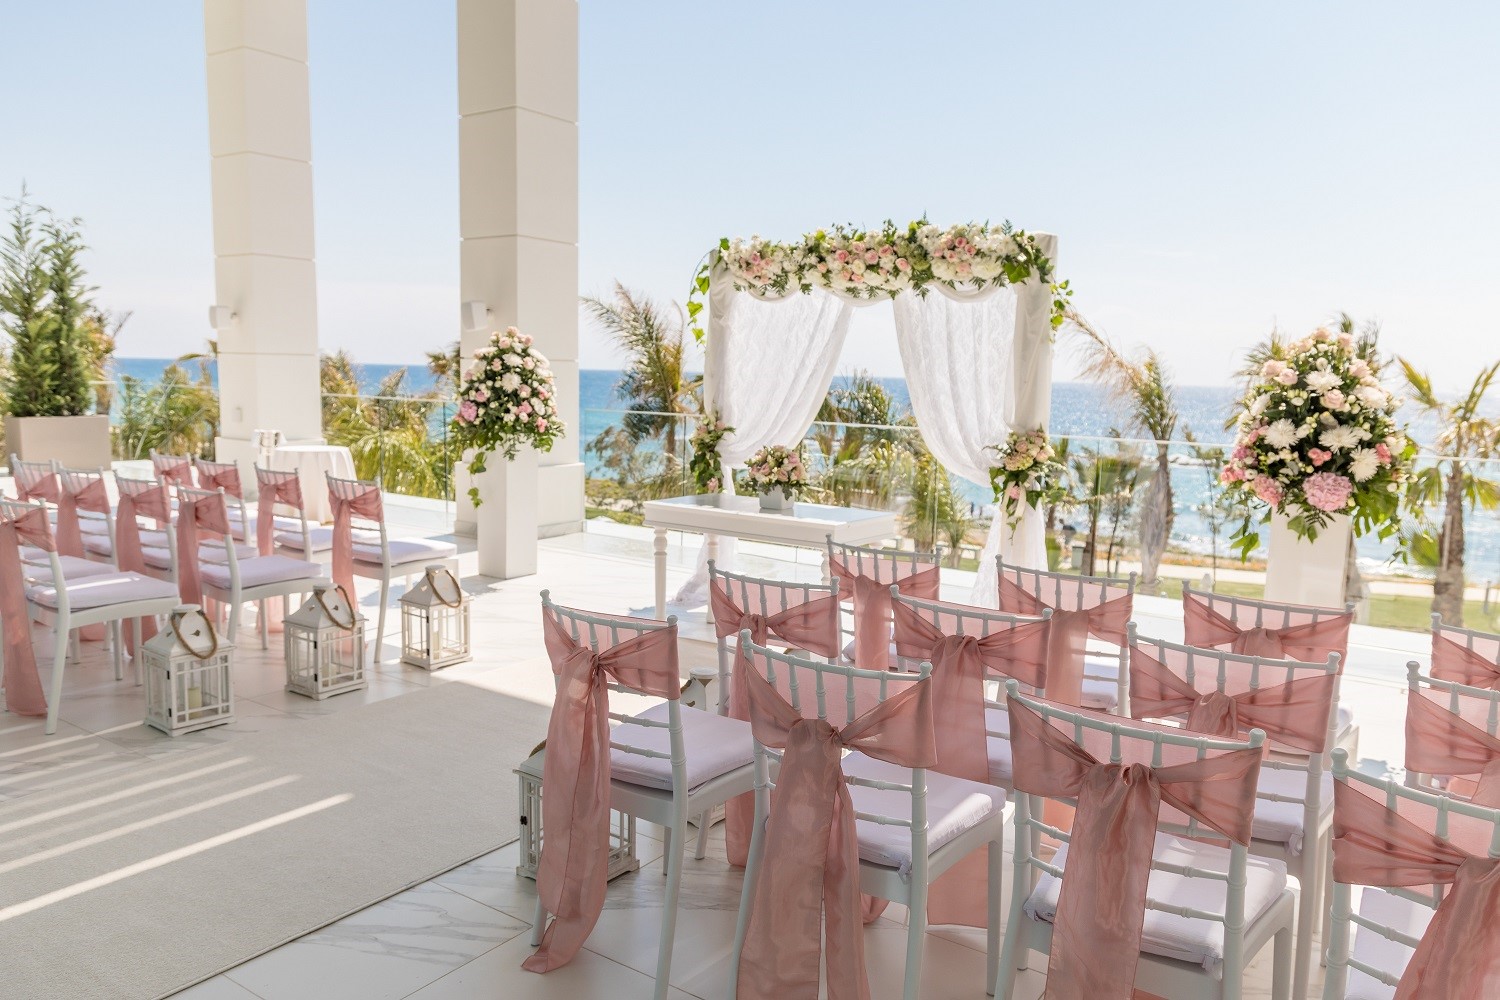 Enchanting Elegance: The Best Wedding Venues in Your Area